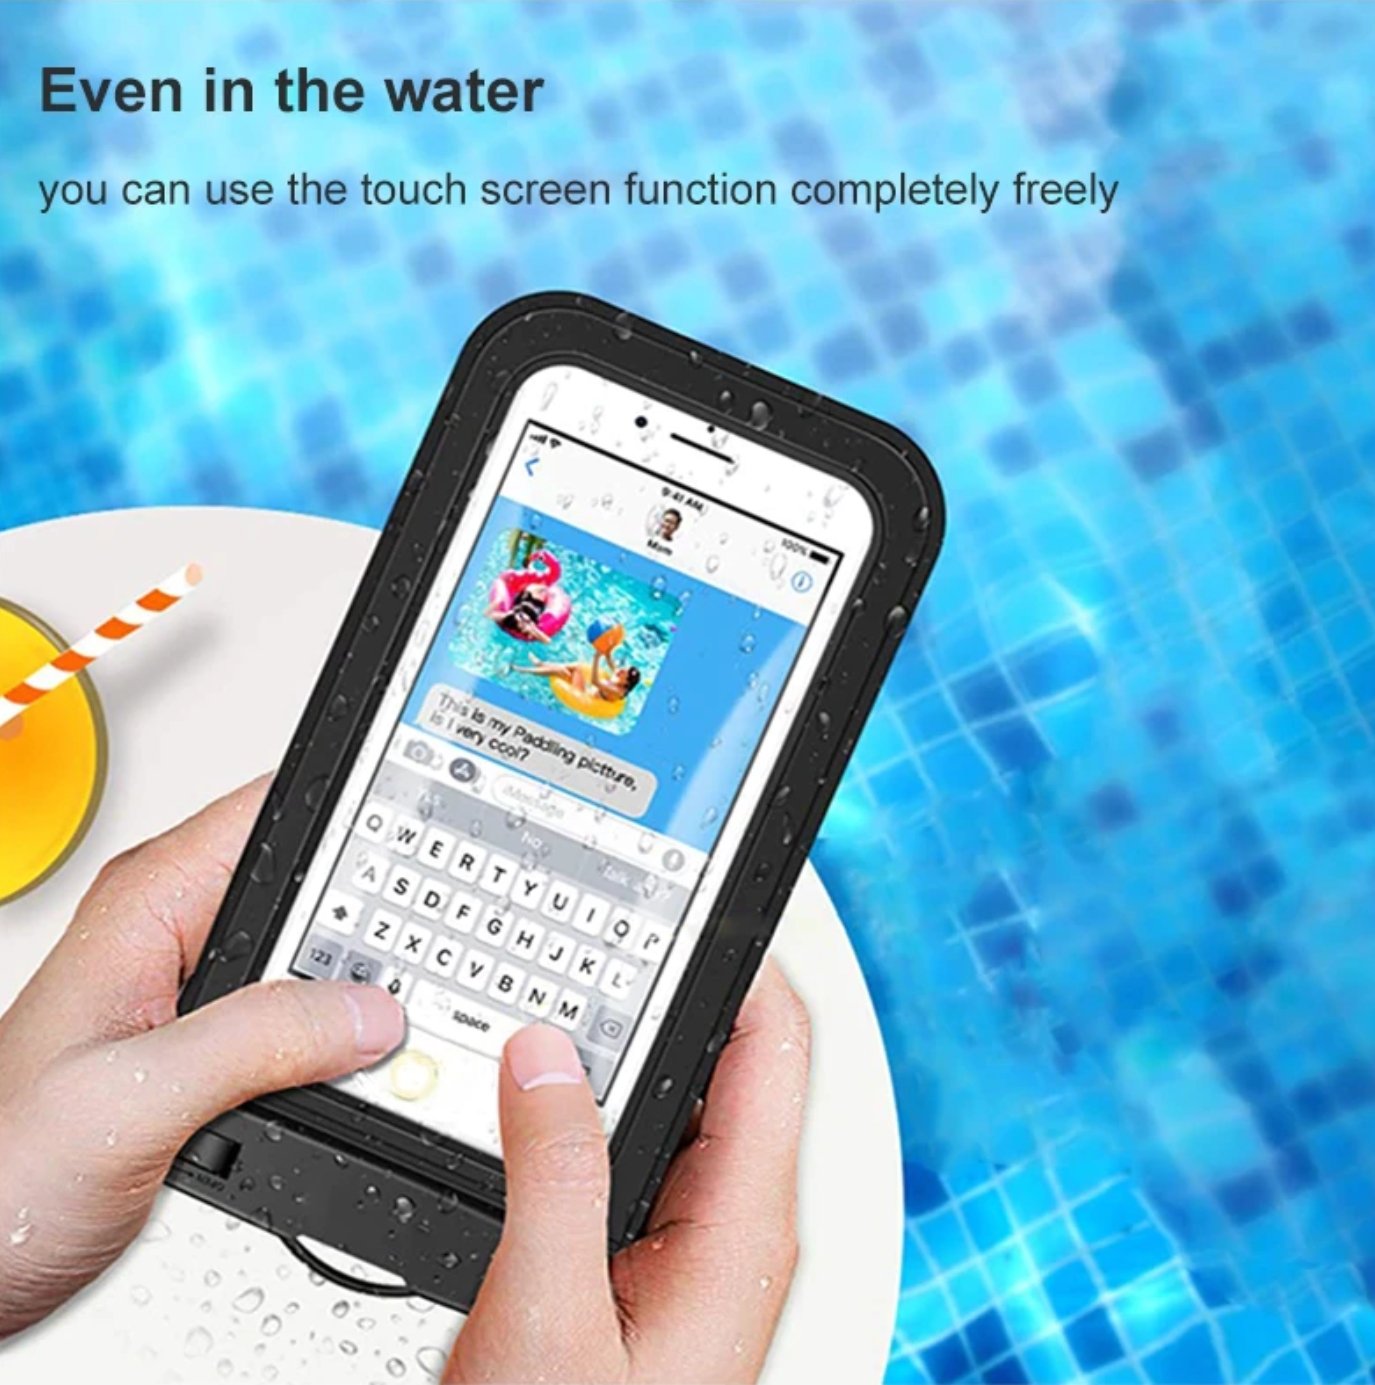 Universal Waterproof Phone Case Compatible with all Smartphones